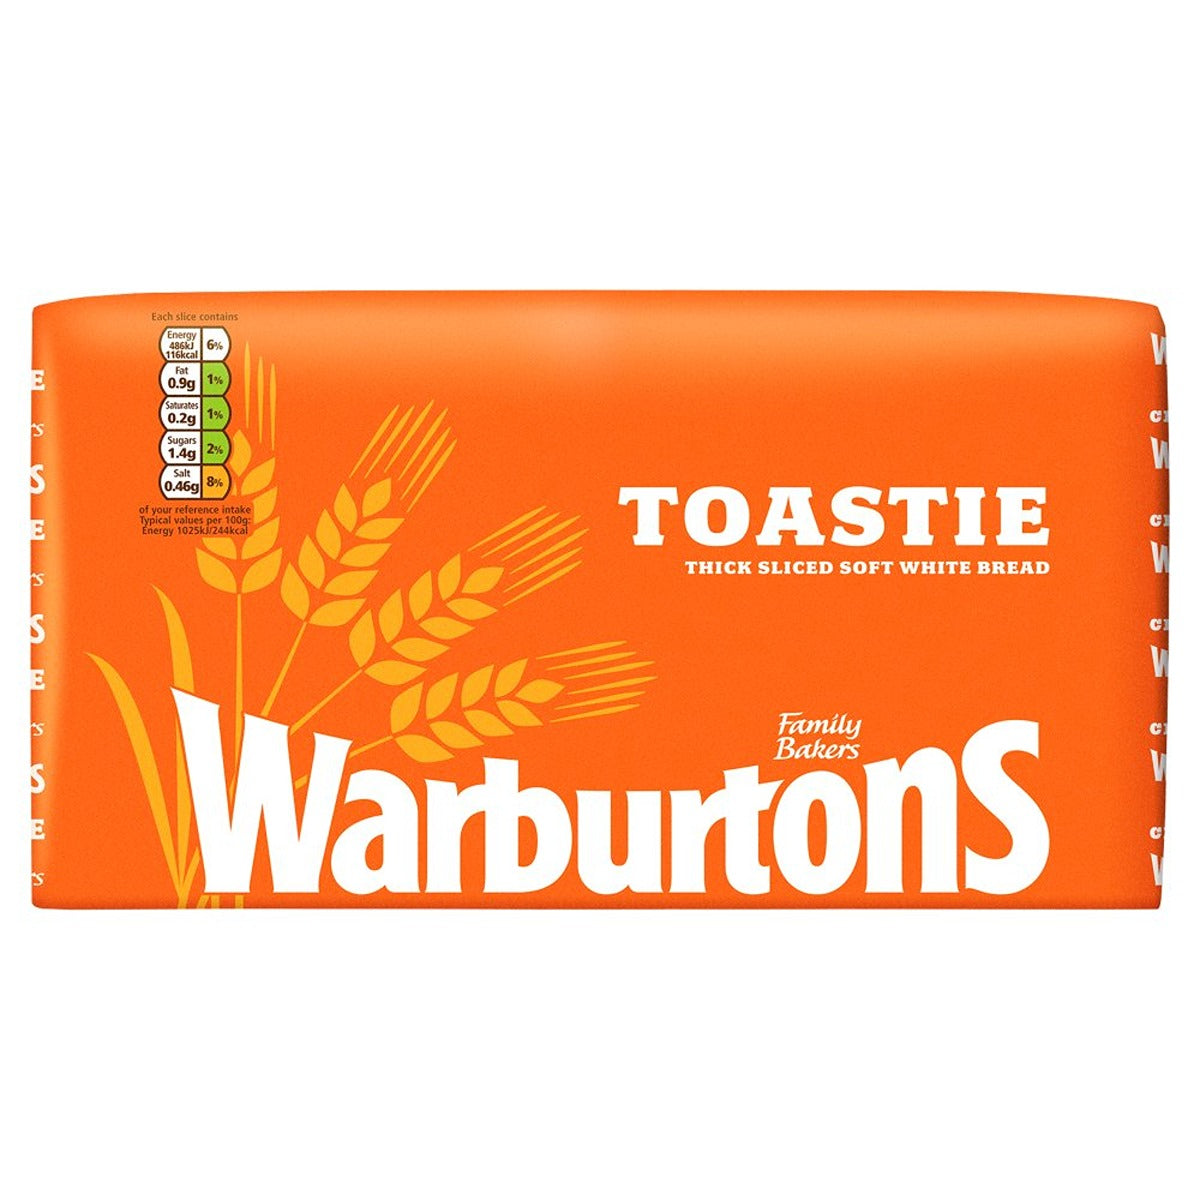 Warburtons - Toastie Thick Sliced Soft White Bread - 800g - Continental Food Store